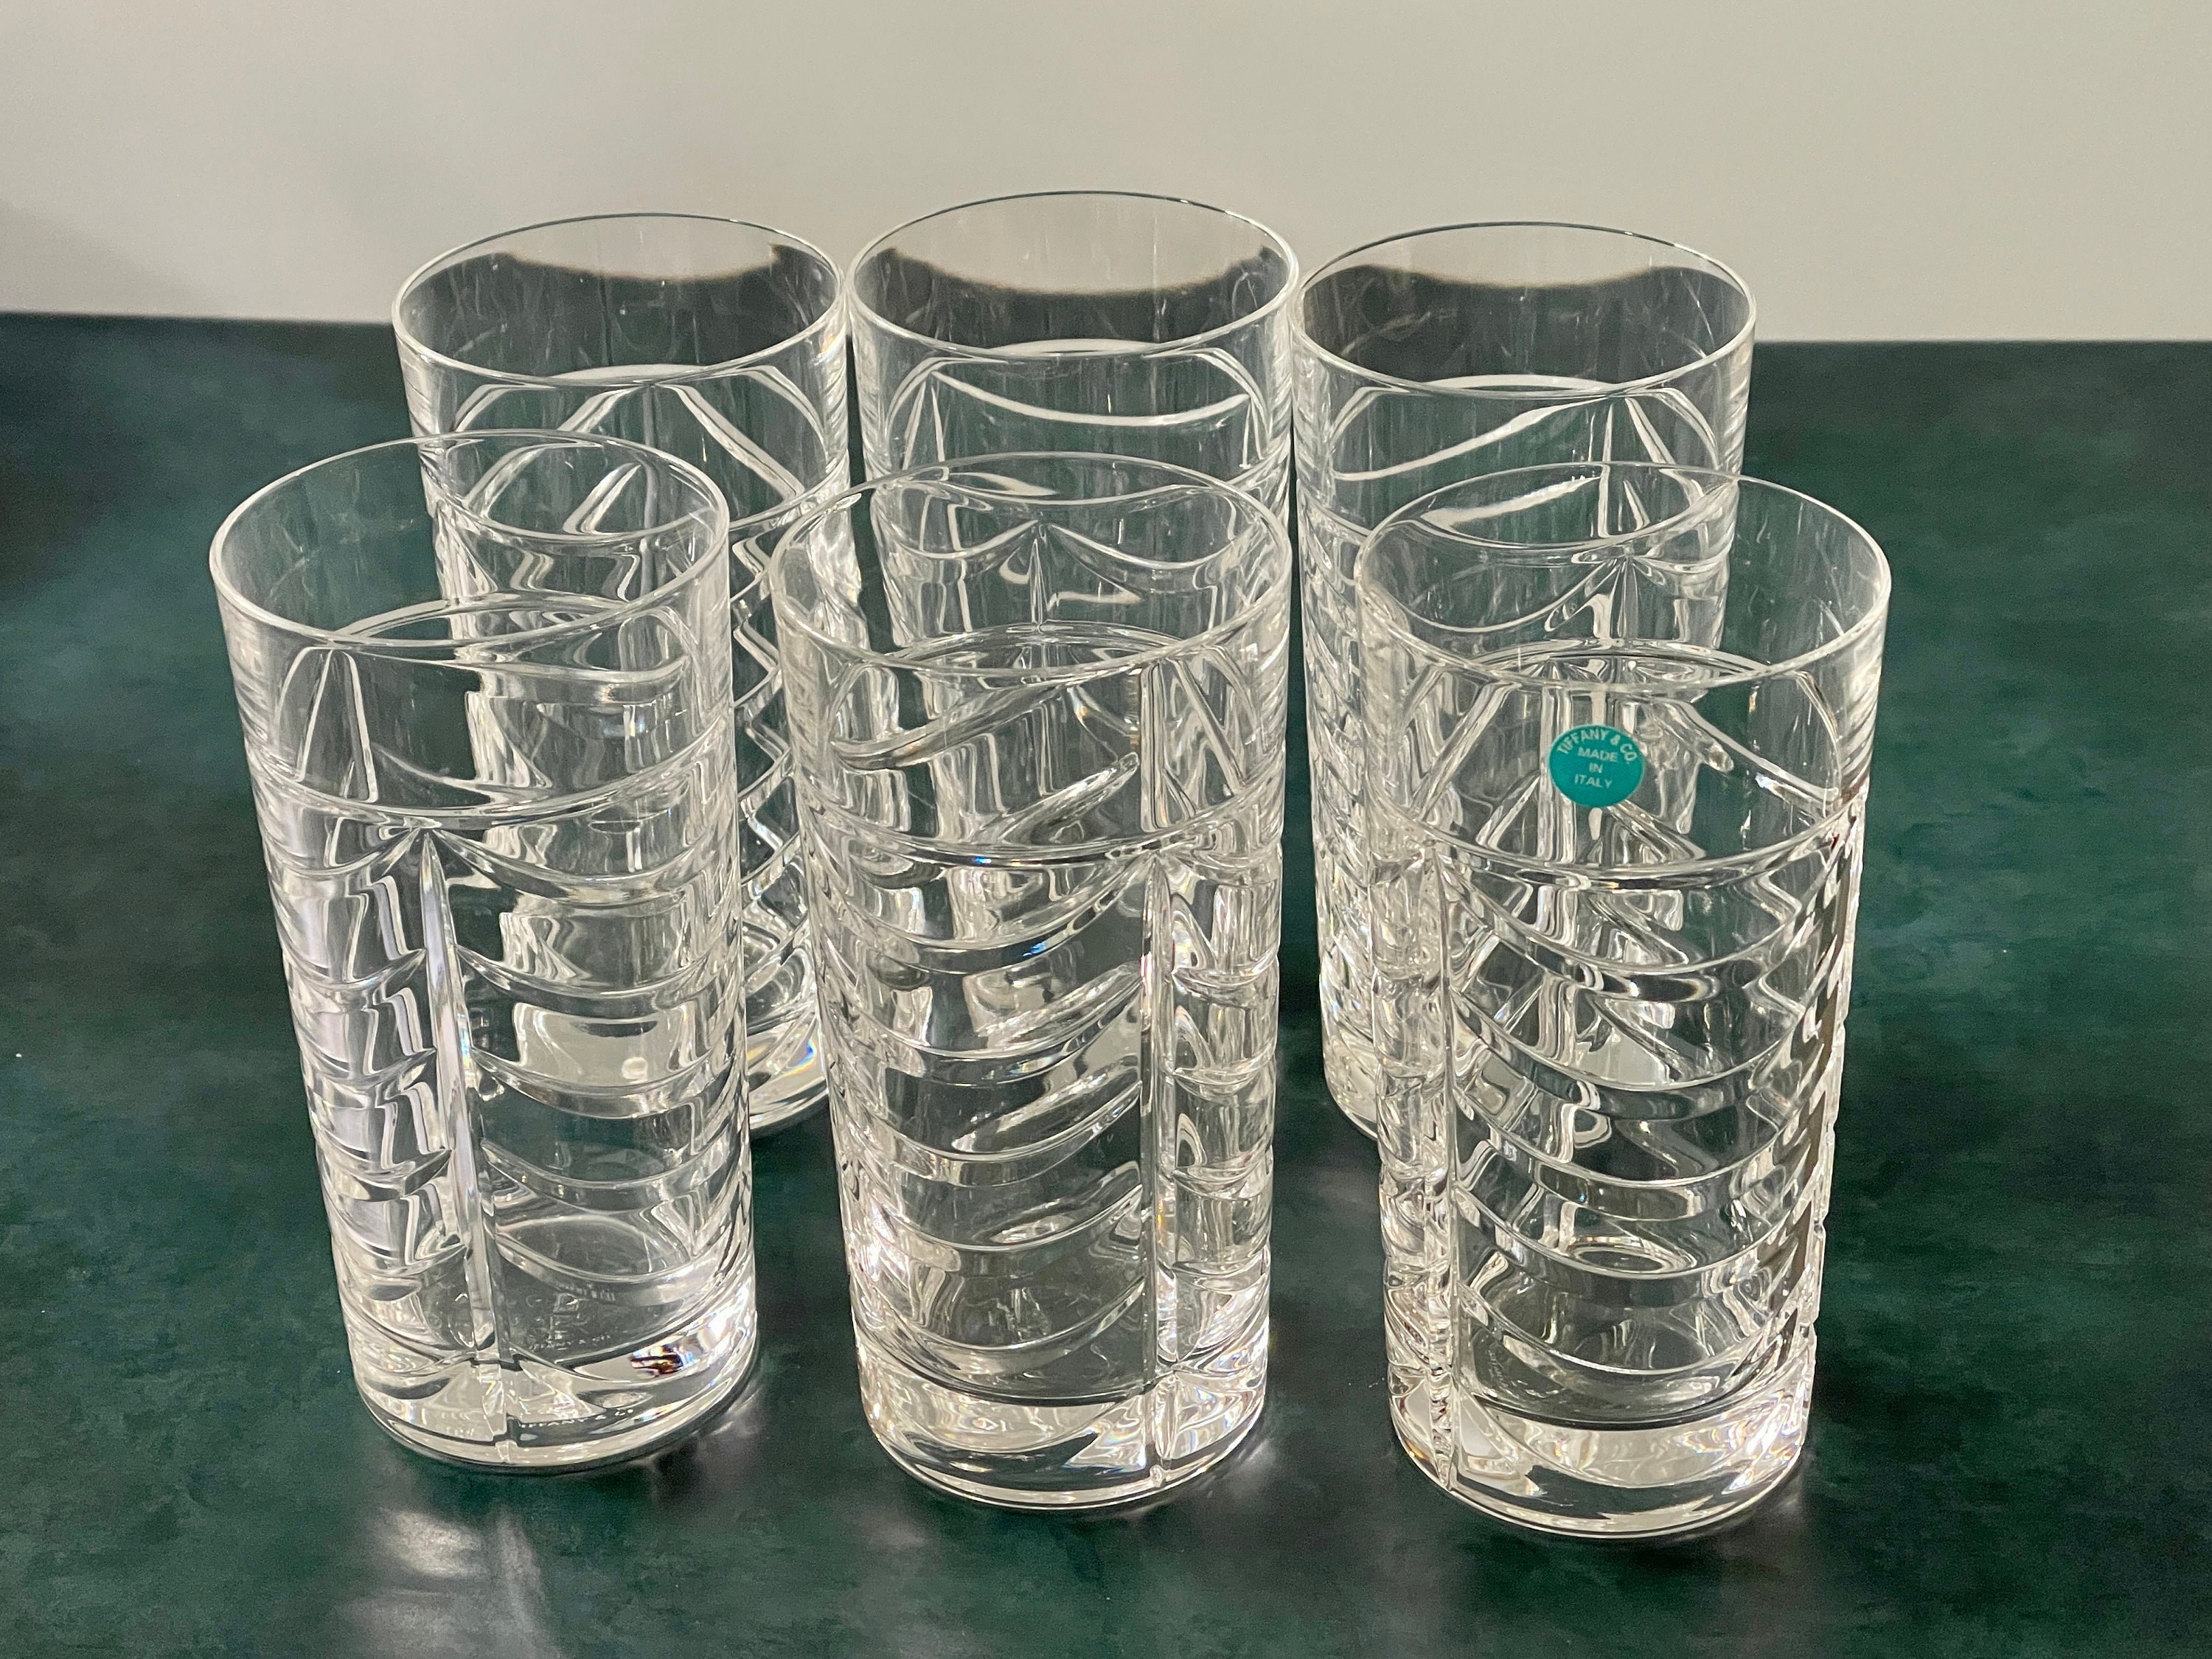 Vintage Art Deco 1920s Highball Cocktail Glasses | Set of 4 | 14 oz Tall  Crystal Tumblers for Drinki…See more Vintage Art Deco 1920s Highball  Cocktail